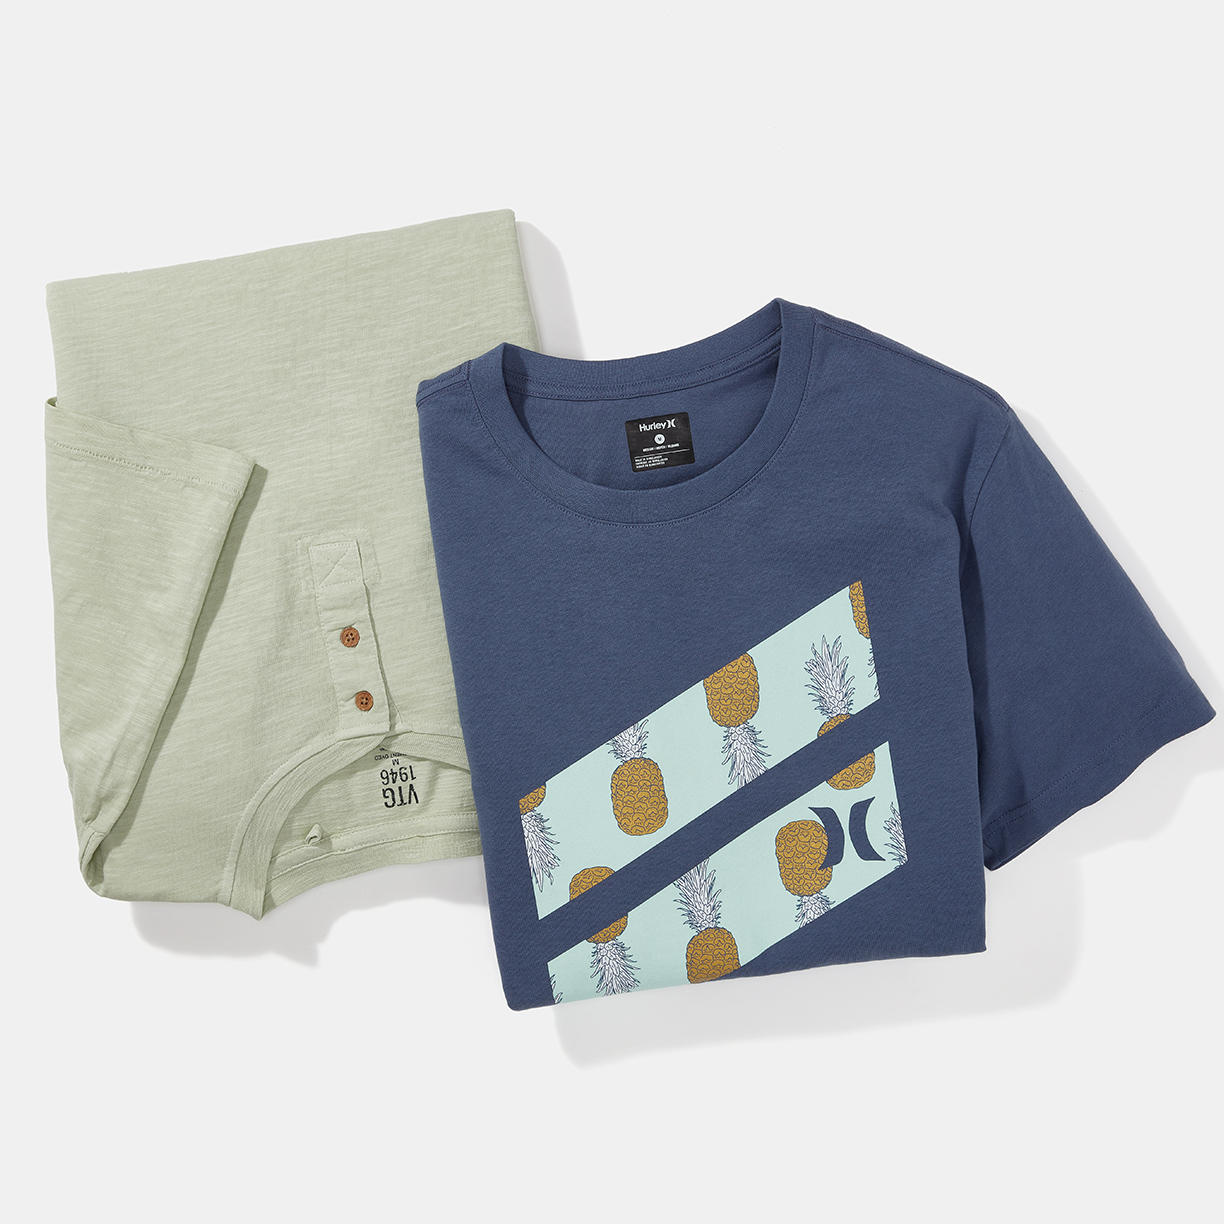 Men's Hurley & More Up to 60% Off